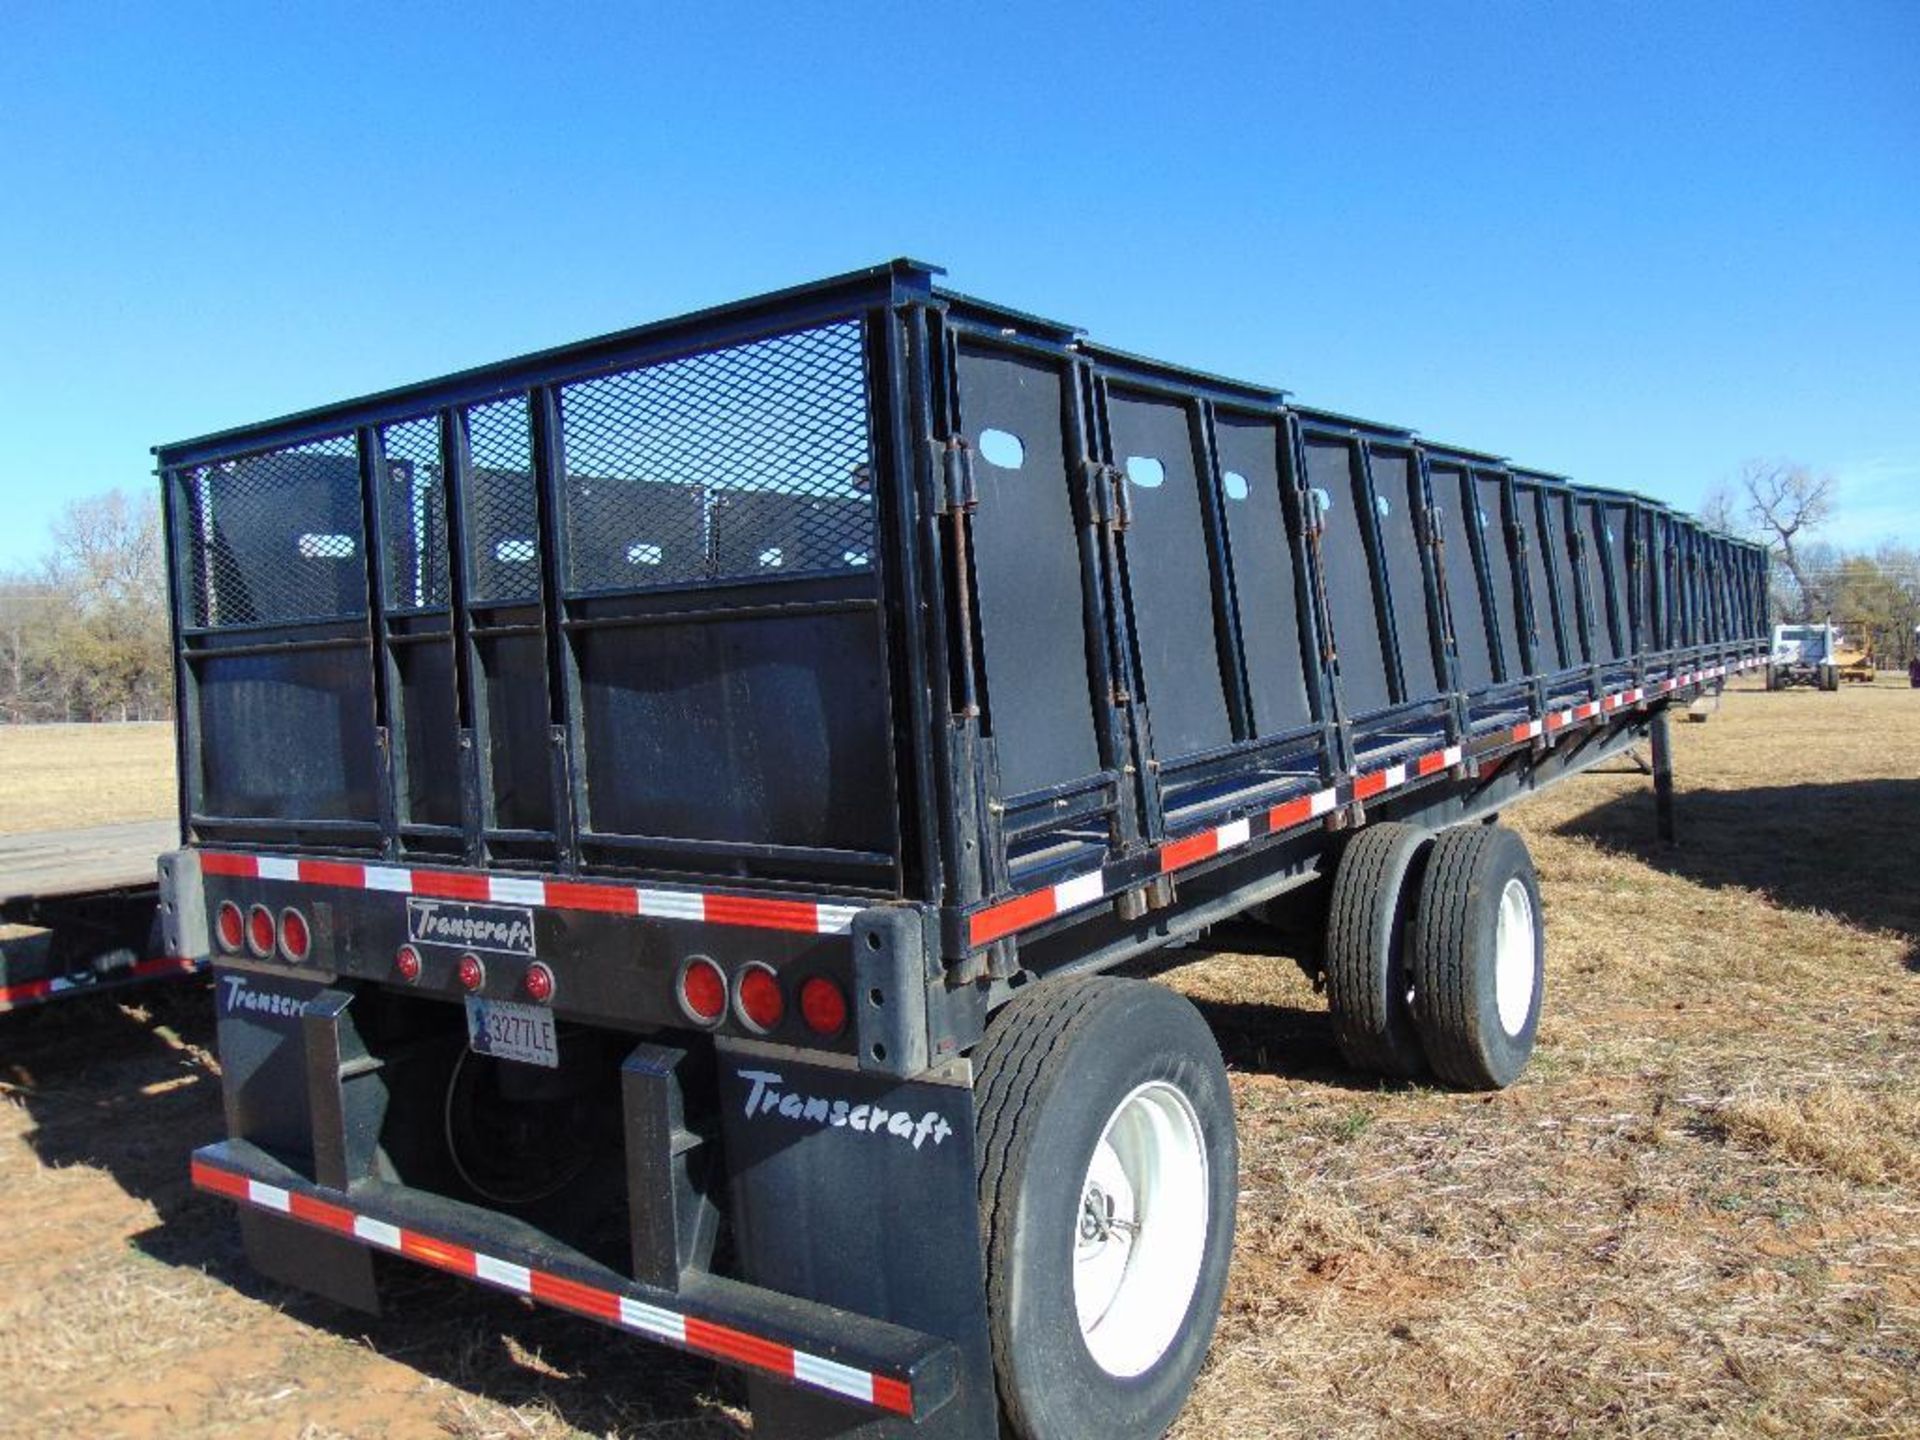 2015 Transcraft 48' Spread Axle w/3' removable sides, s/n 1ttf482sxi3885072 - Image 8 of 8